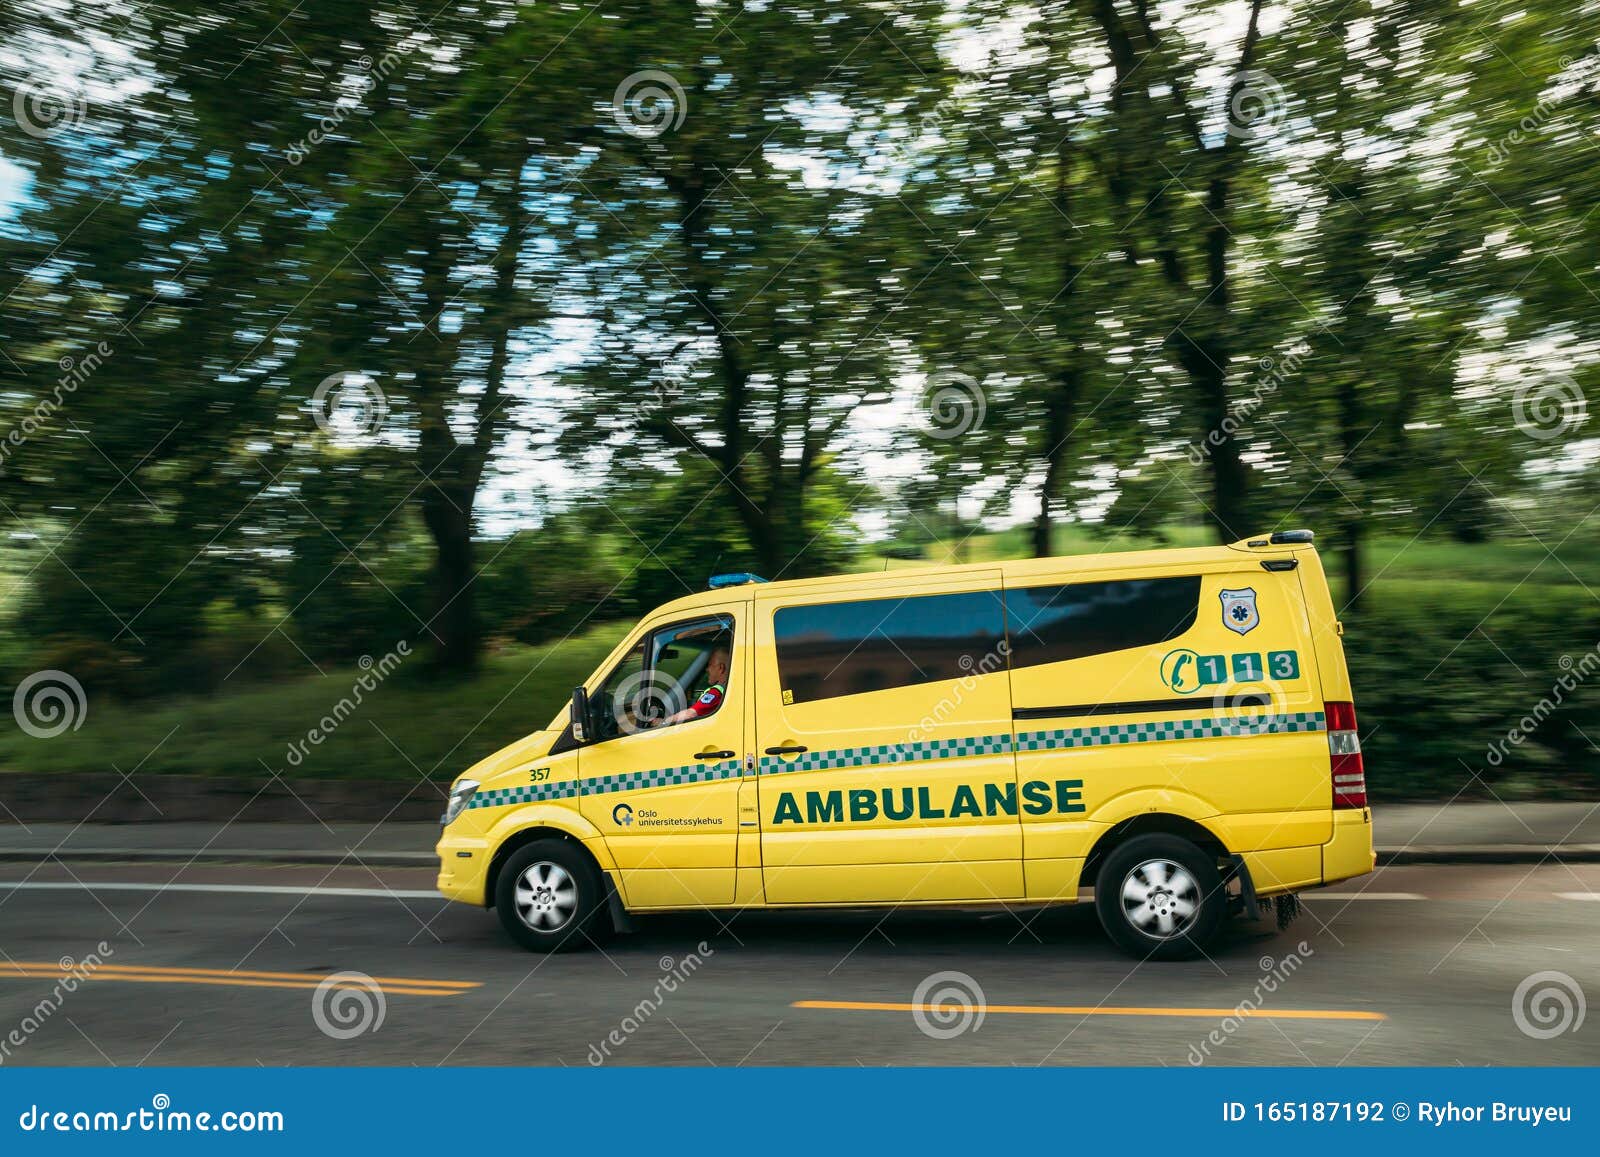 solsikke Monograph indlæg Oslo, Norway. Moving with Siren Emergency Ambulance Reanimation Mercedes  Benz Van Car on Street. Editorial Photography - Image of care, street:  165187192